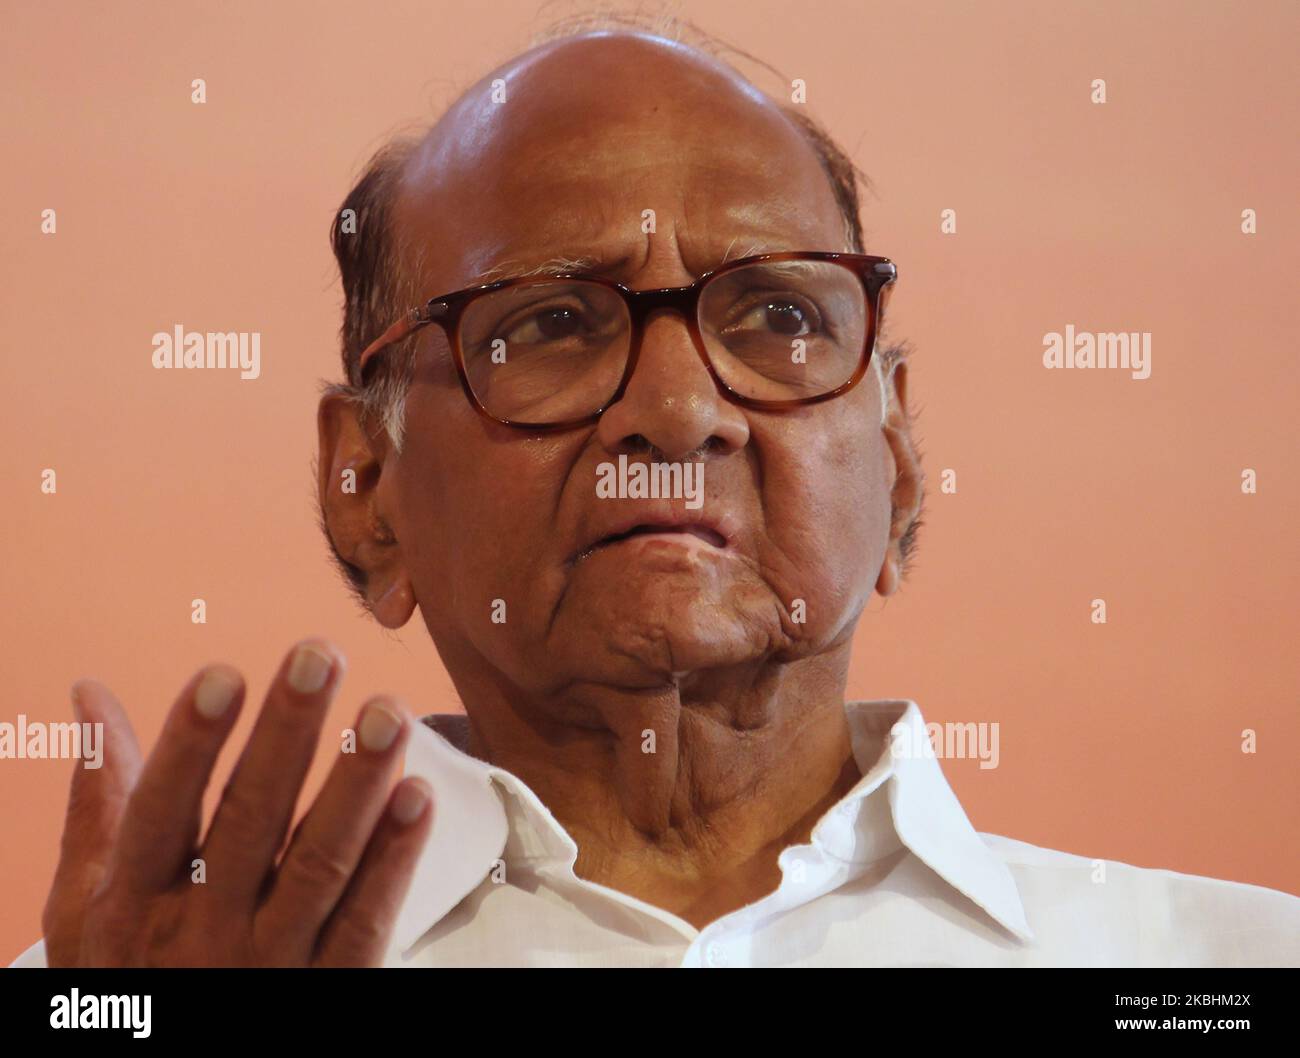 The Nationalist Congress Party (NCP) chief Sharad Pawar reacts during an event on February 23, 2020 in Mumbai, India. (Photo by Himanshu Bhatt/NurPhoto) Stock Photo